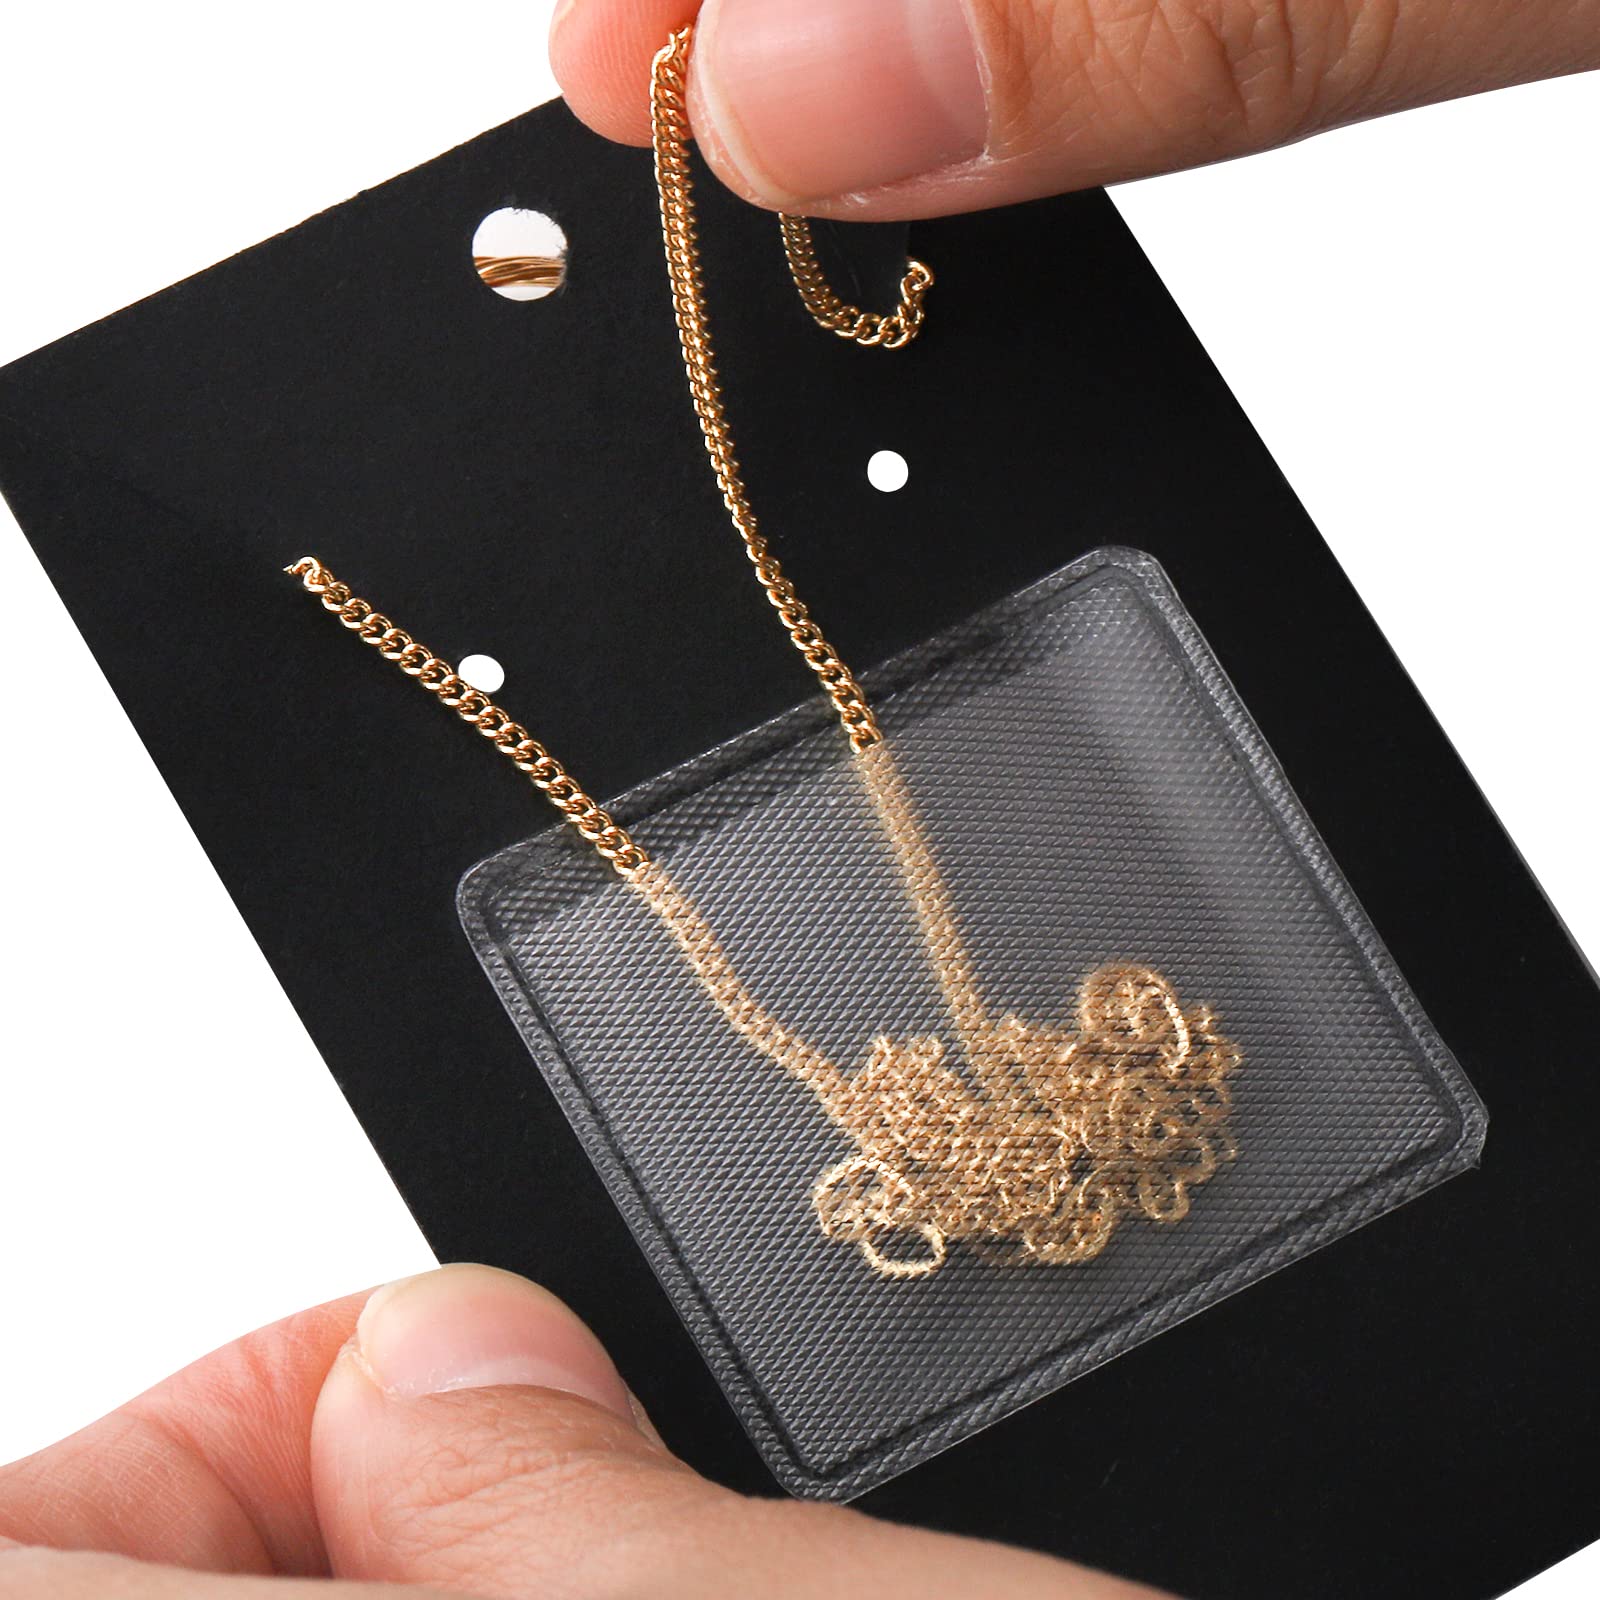 SOUJOY 500 Pieces Necklace Chain Adhesive Pouch, Self-Adhesive Necklace Chain Pockets for Necklace Display Cards, Clear Jewelry Bag for Loose Chain Jewelry Supplies Necklace Chain Holder